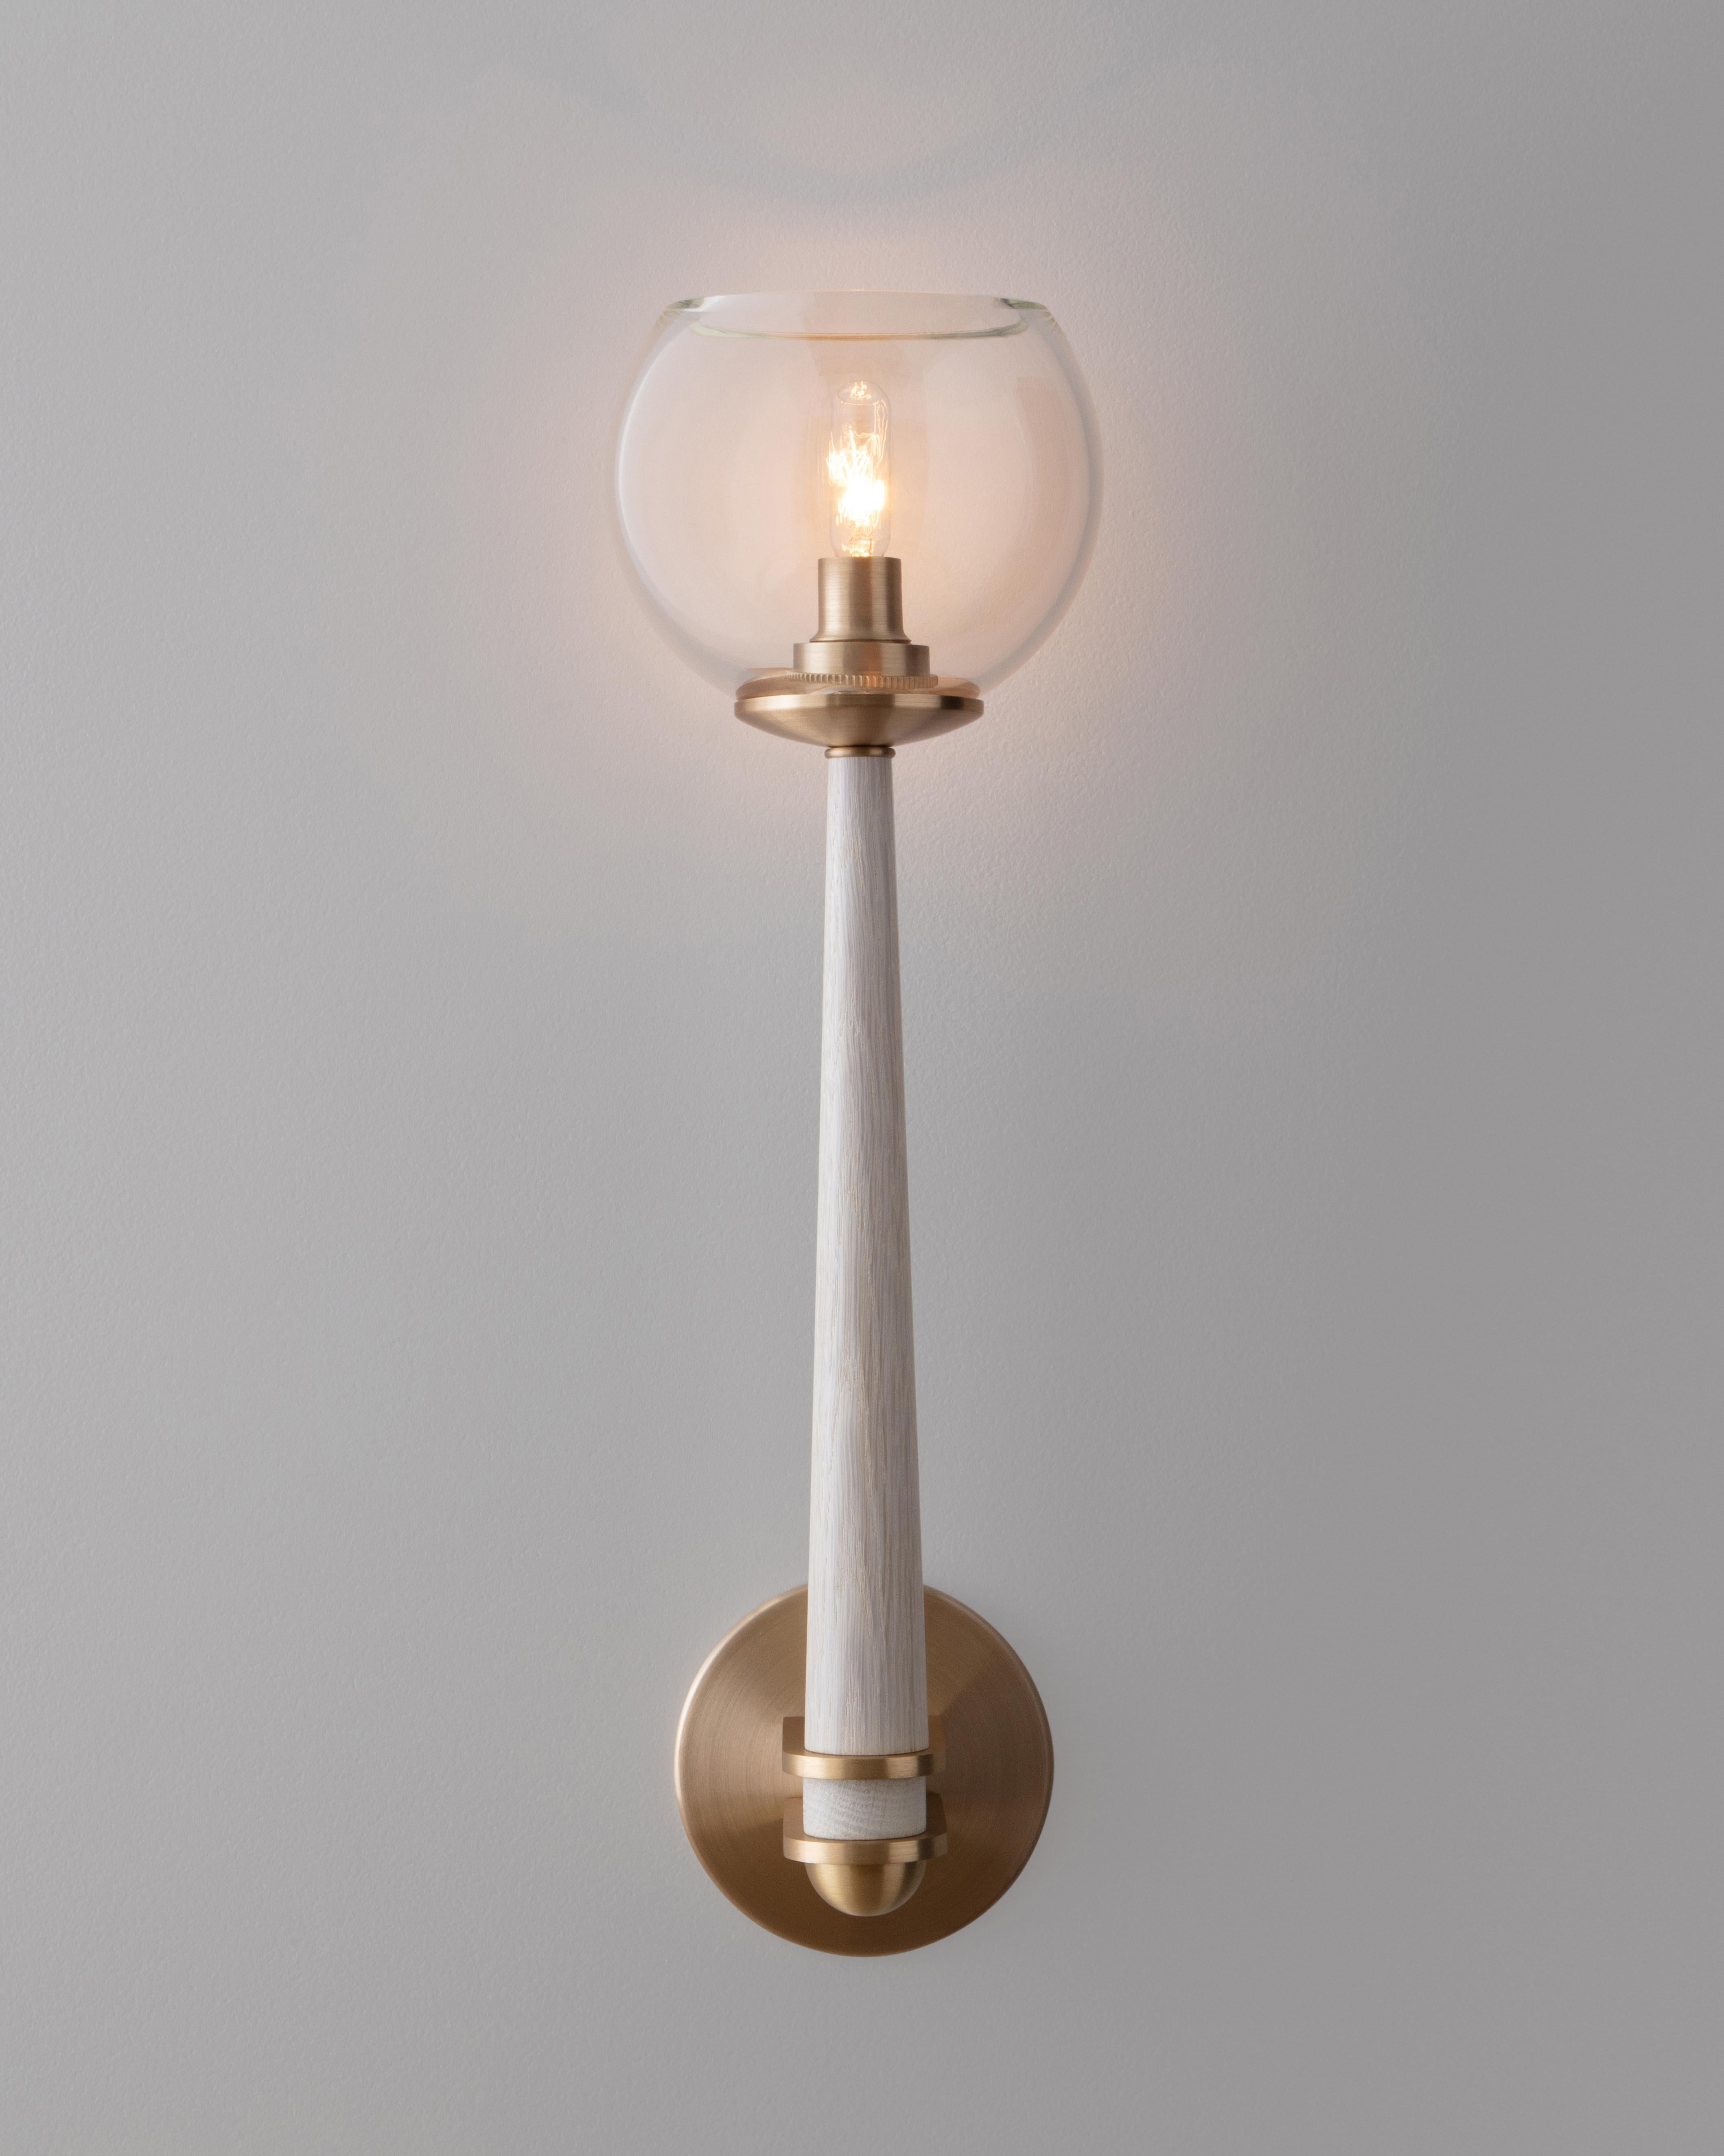 Walnut Giotto Sconce (Classic) in Oak and Brass Finishes by Matthew Fairbank For Sale